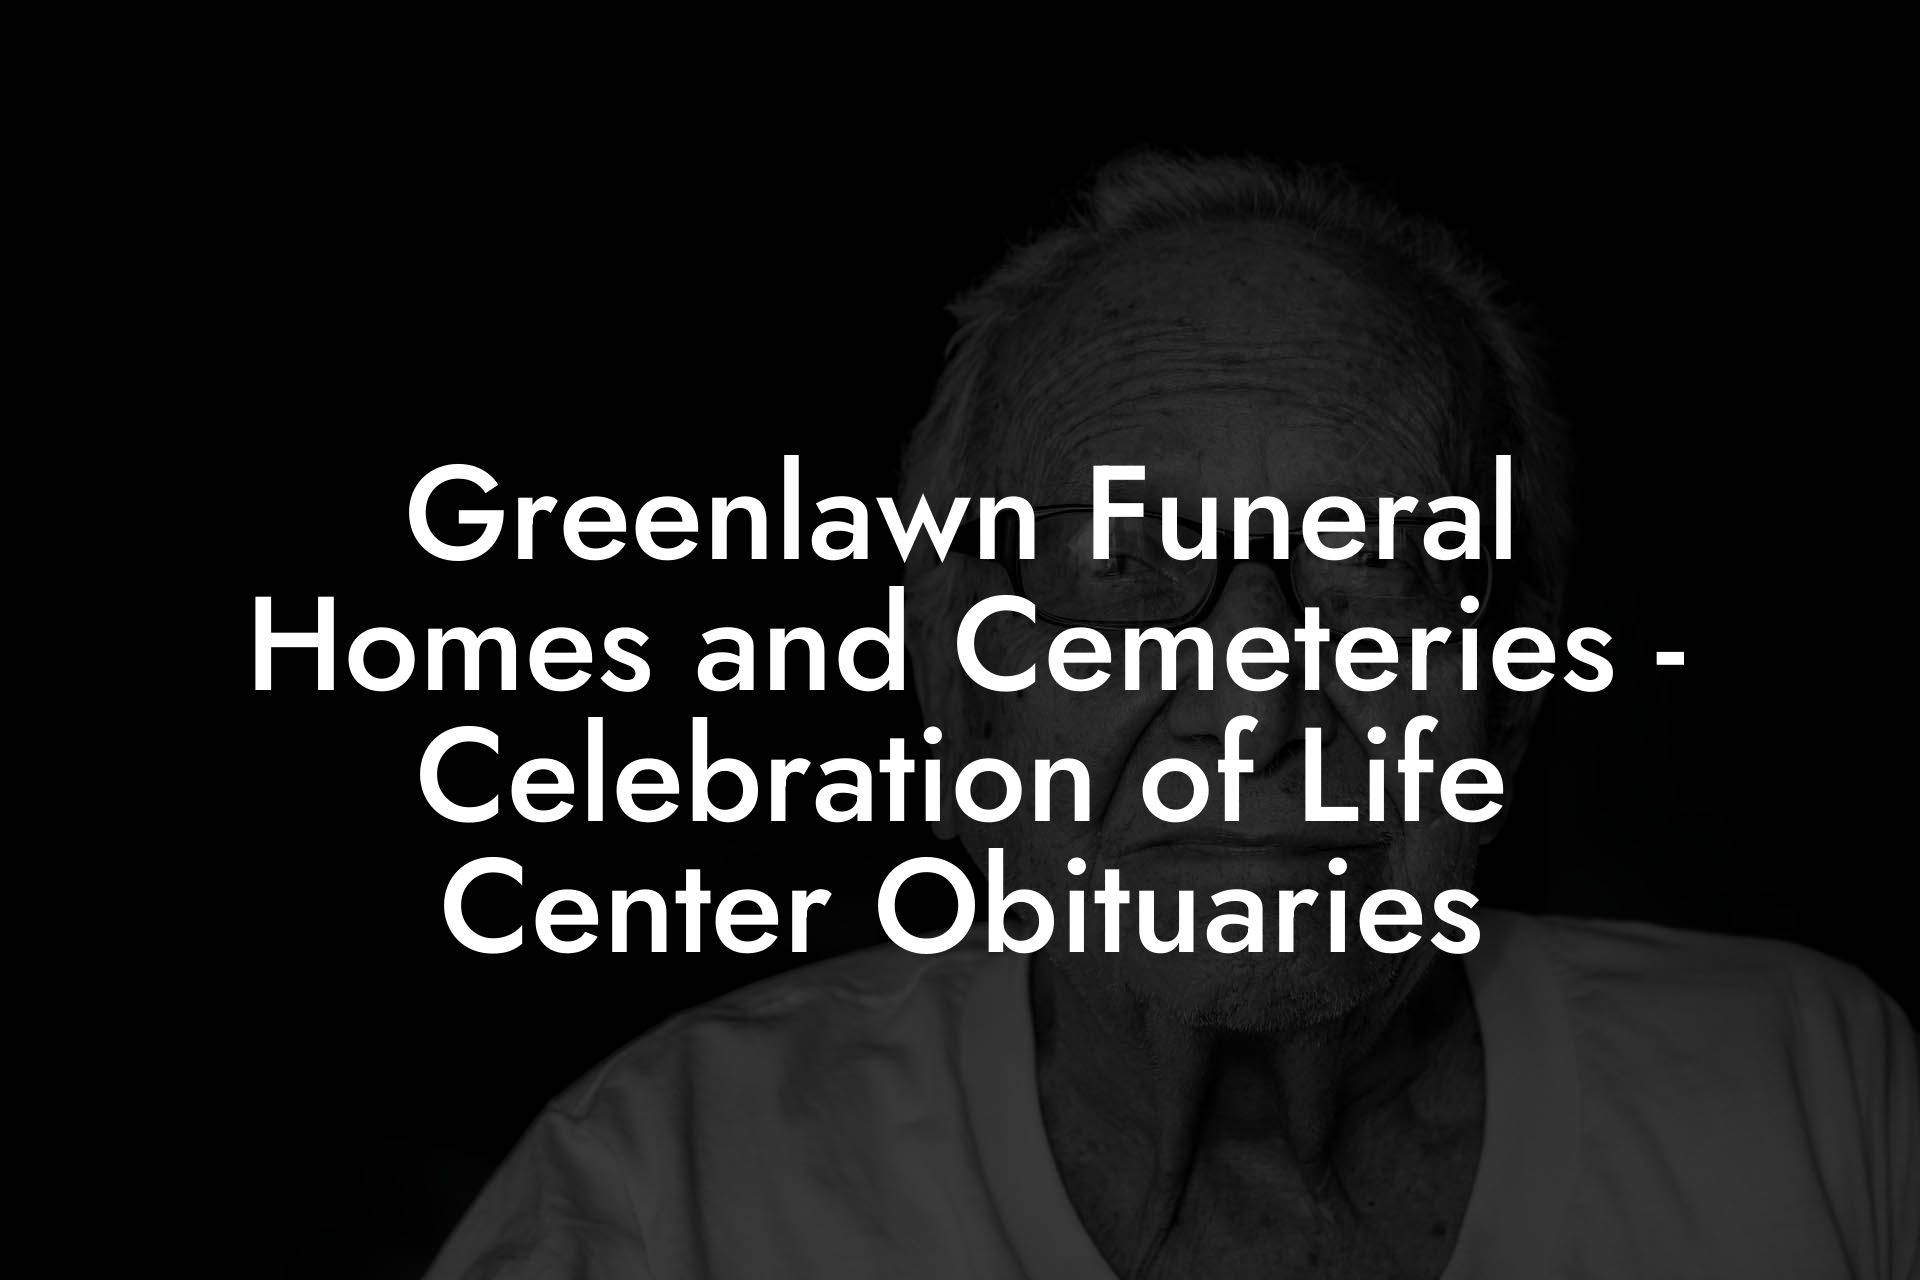 Greenlawn Funeral Homes and Cemeteries - Celebration of Life Center Obituaries